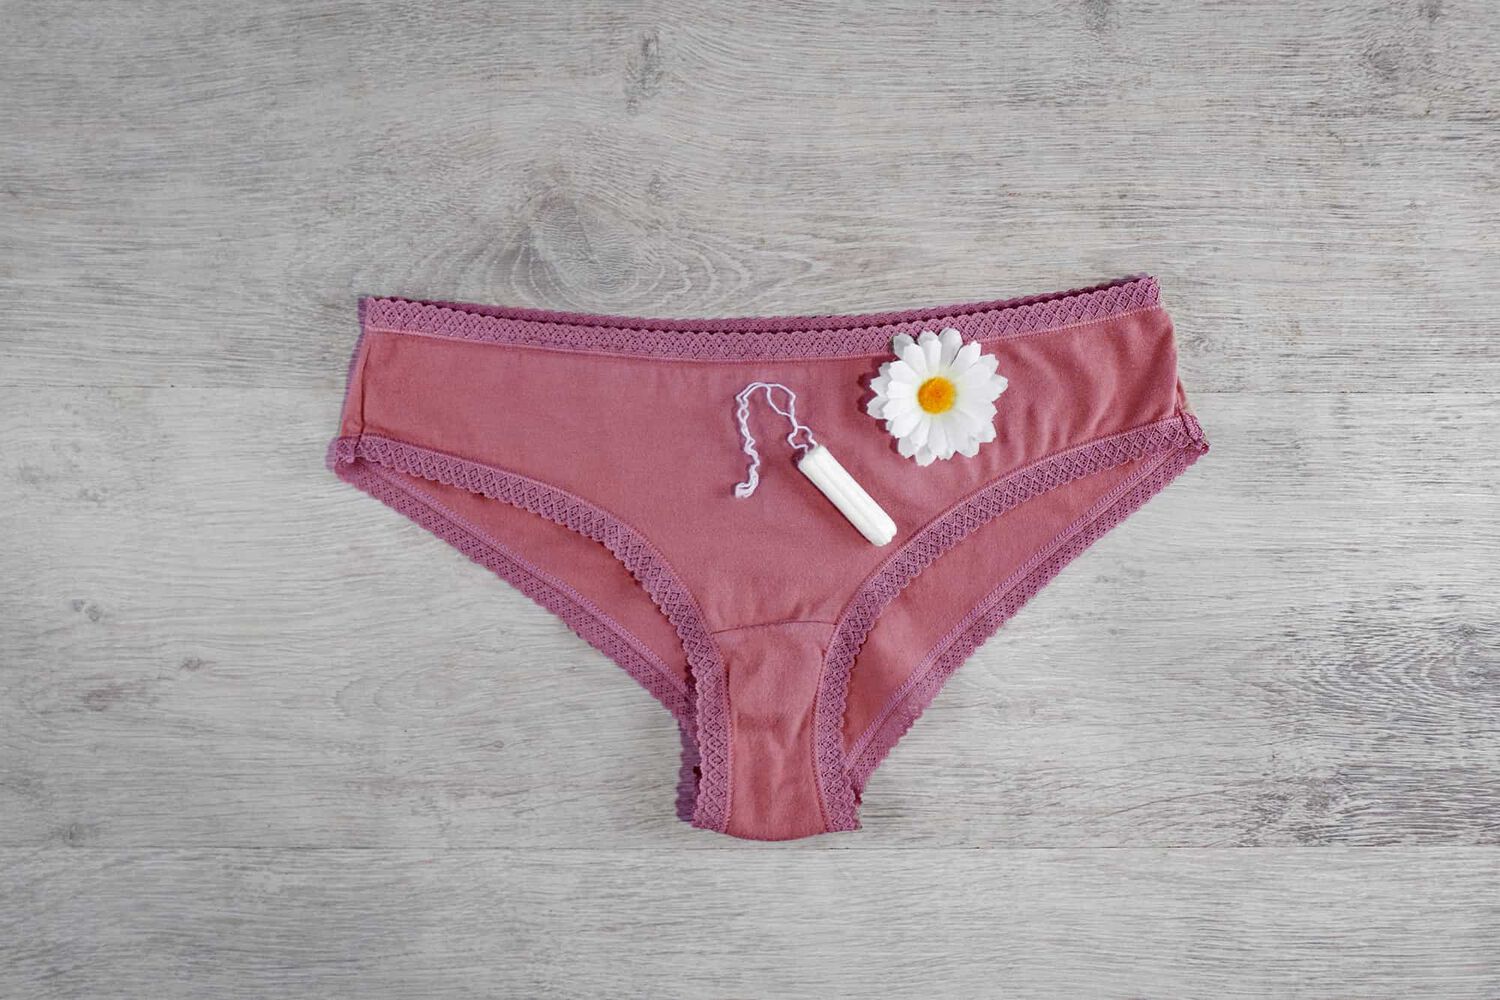 How To Wear A Thong On Your Period